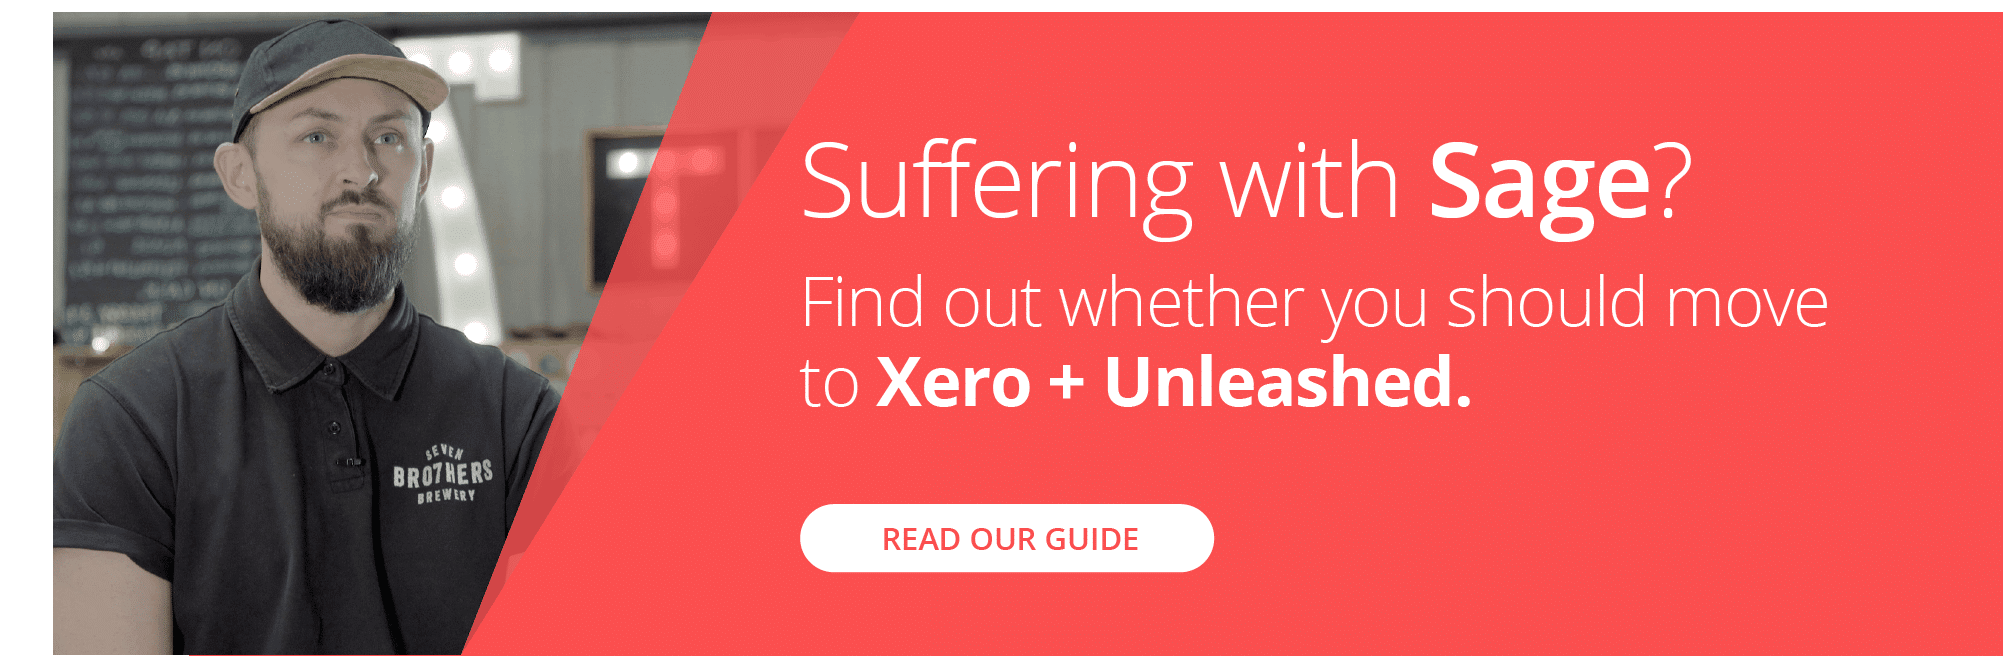 Find out whether you should move from Sage to Zero + Unleashed